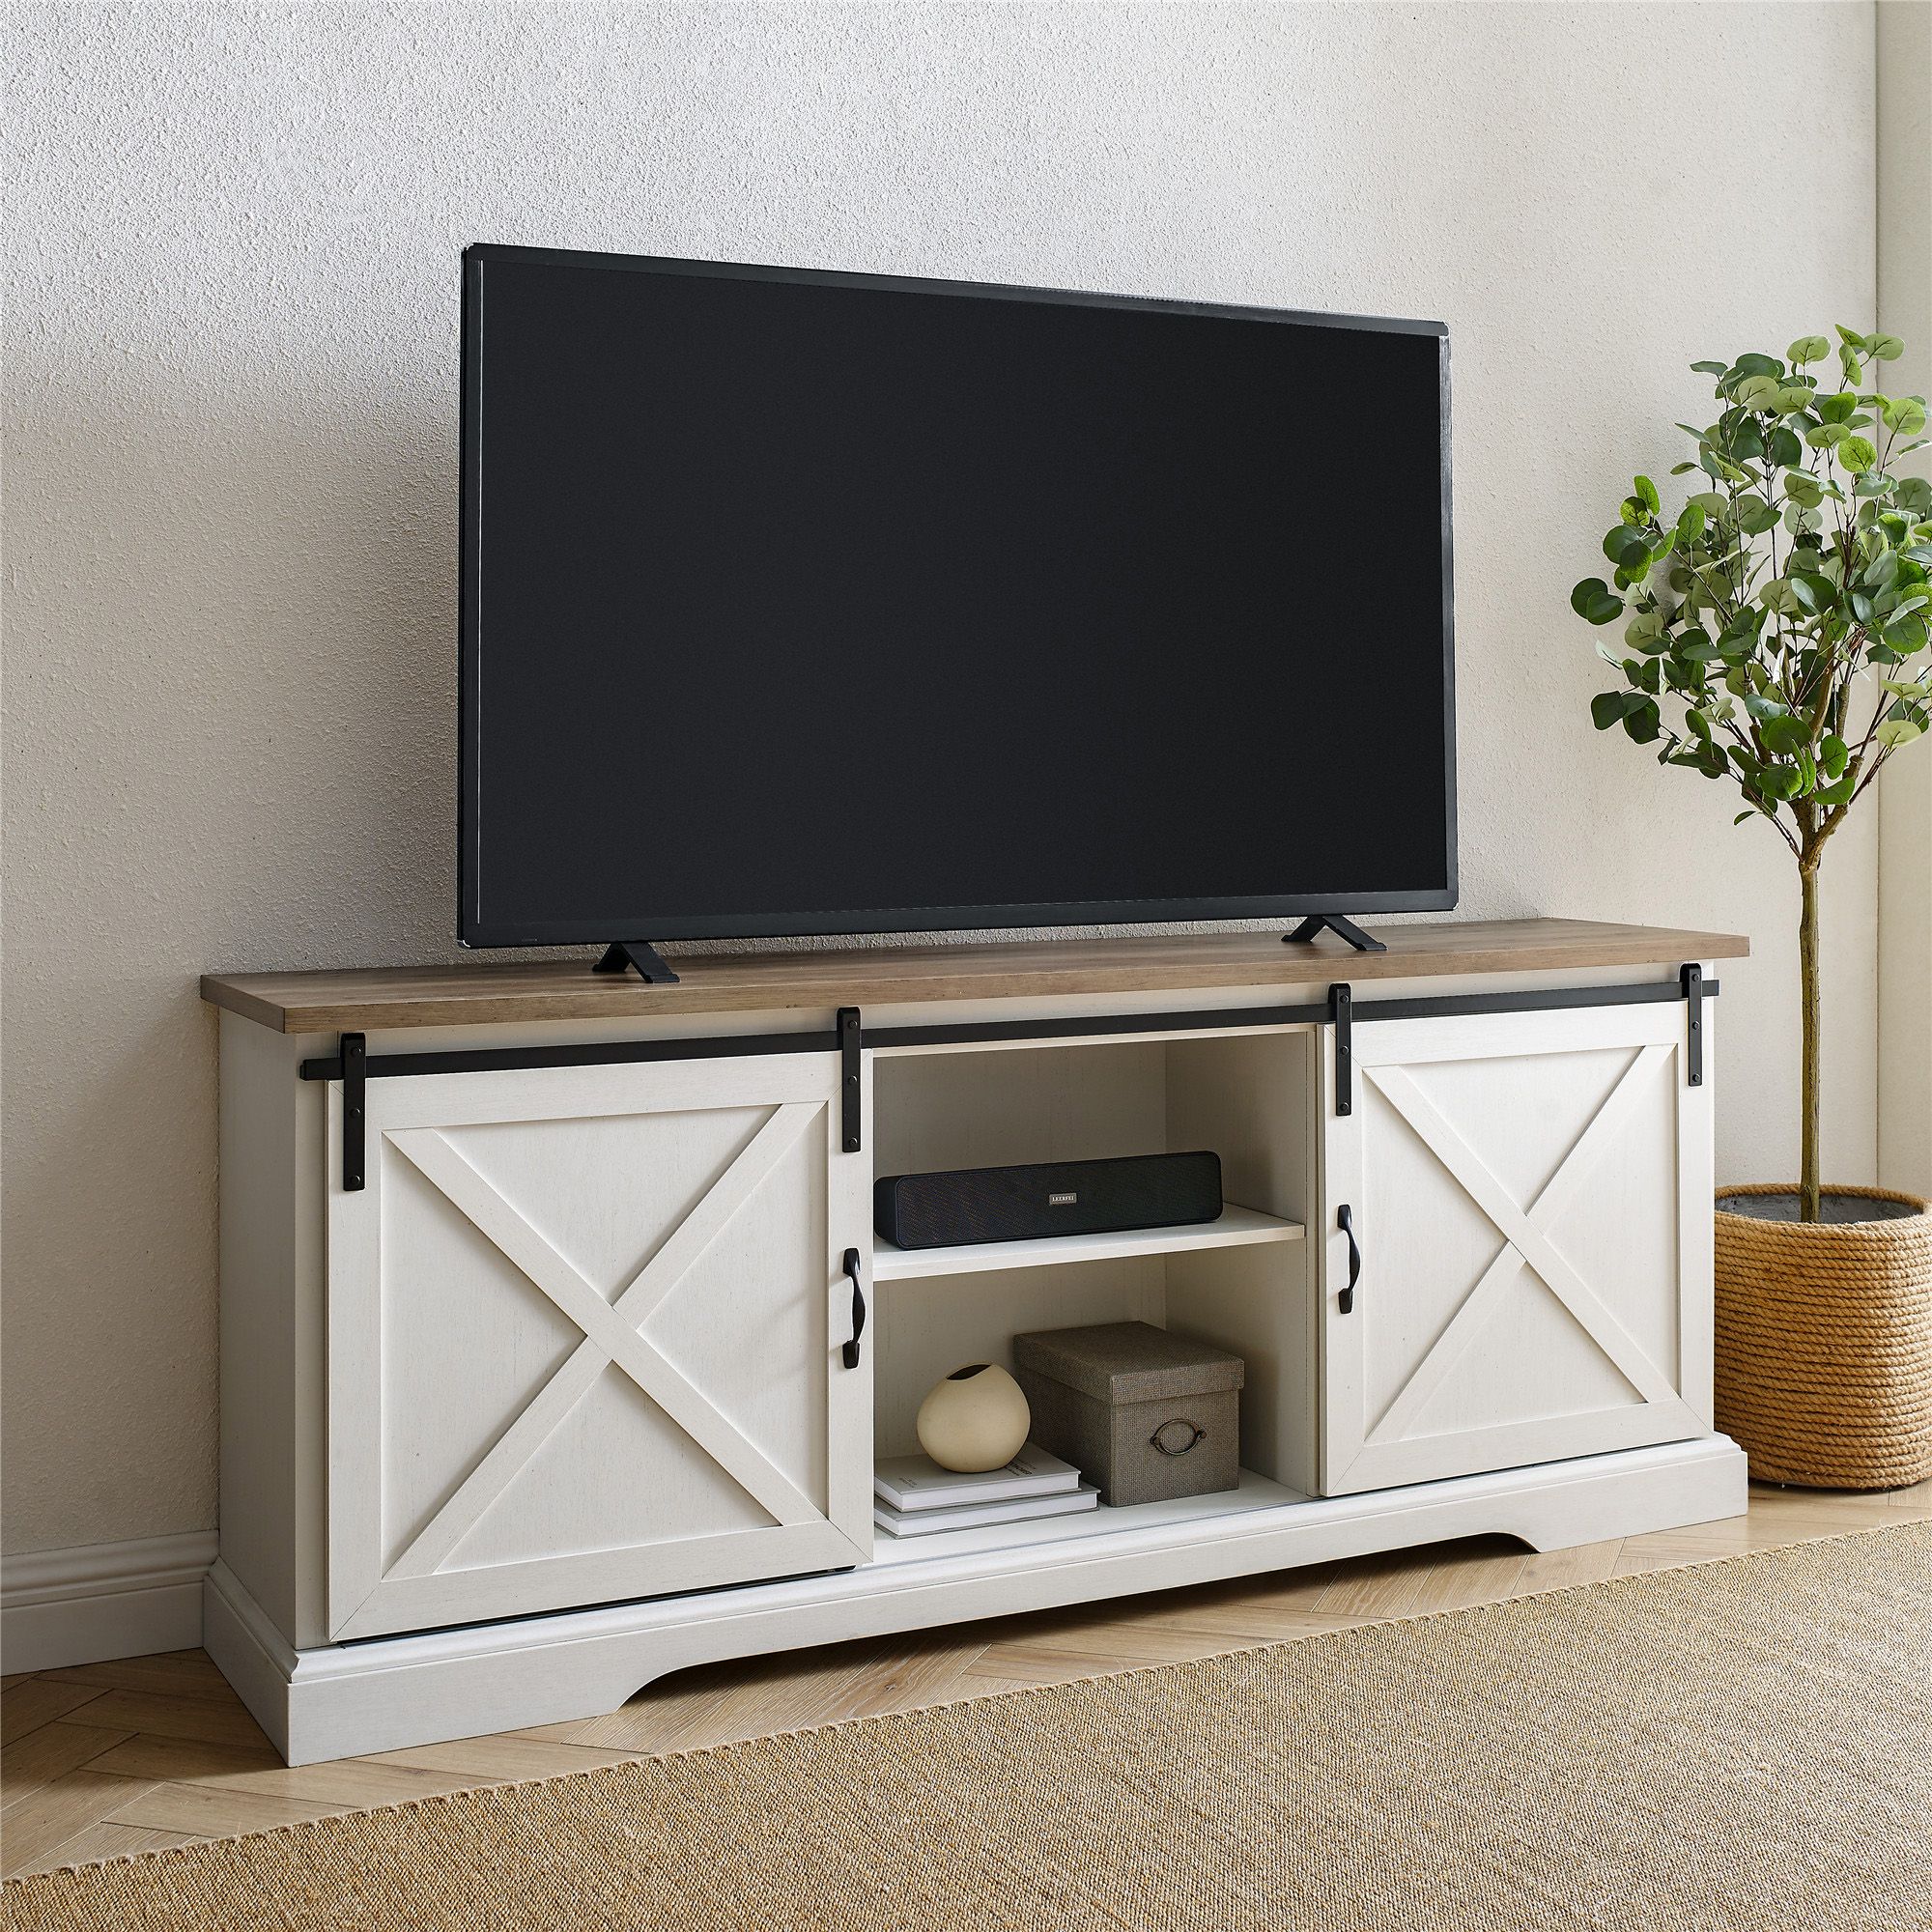 Manor Park Sliding Door Tv Stand For Tvs Up To 80", White Within Opod Tv Stand White (View 1 of 15)